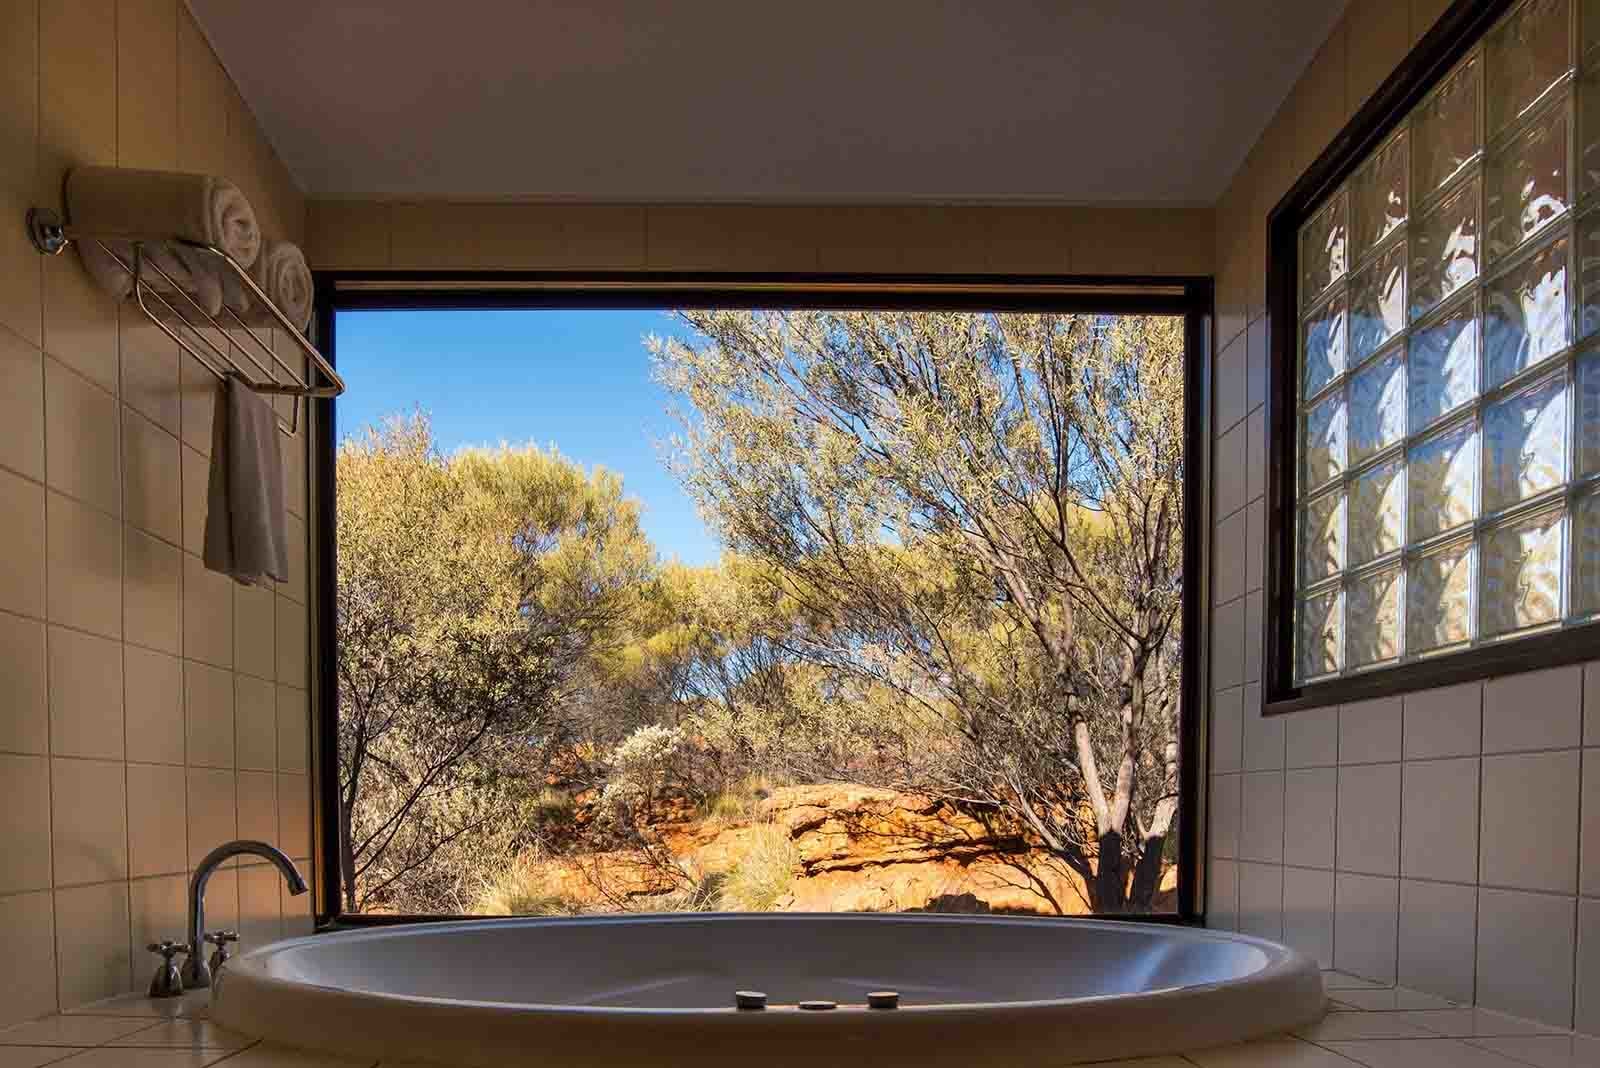 Deluxe villa accommodation at Kings Canyon Resort | See Australia's Red Centre in a new light